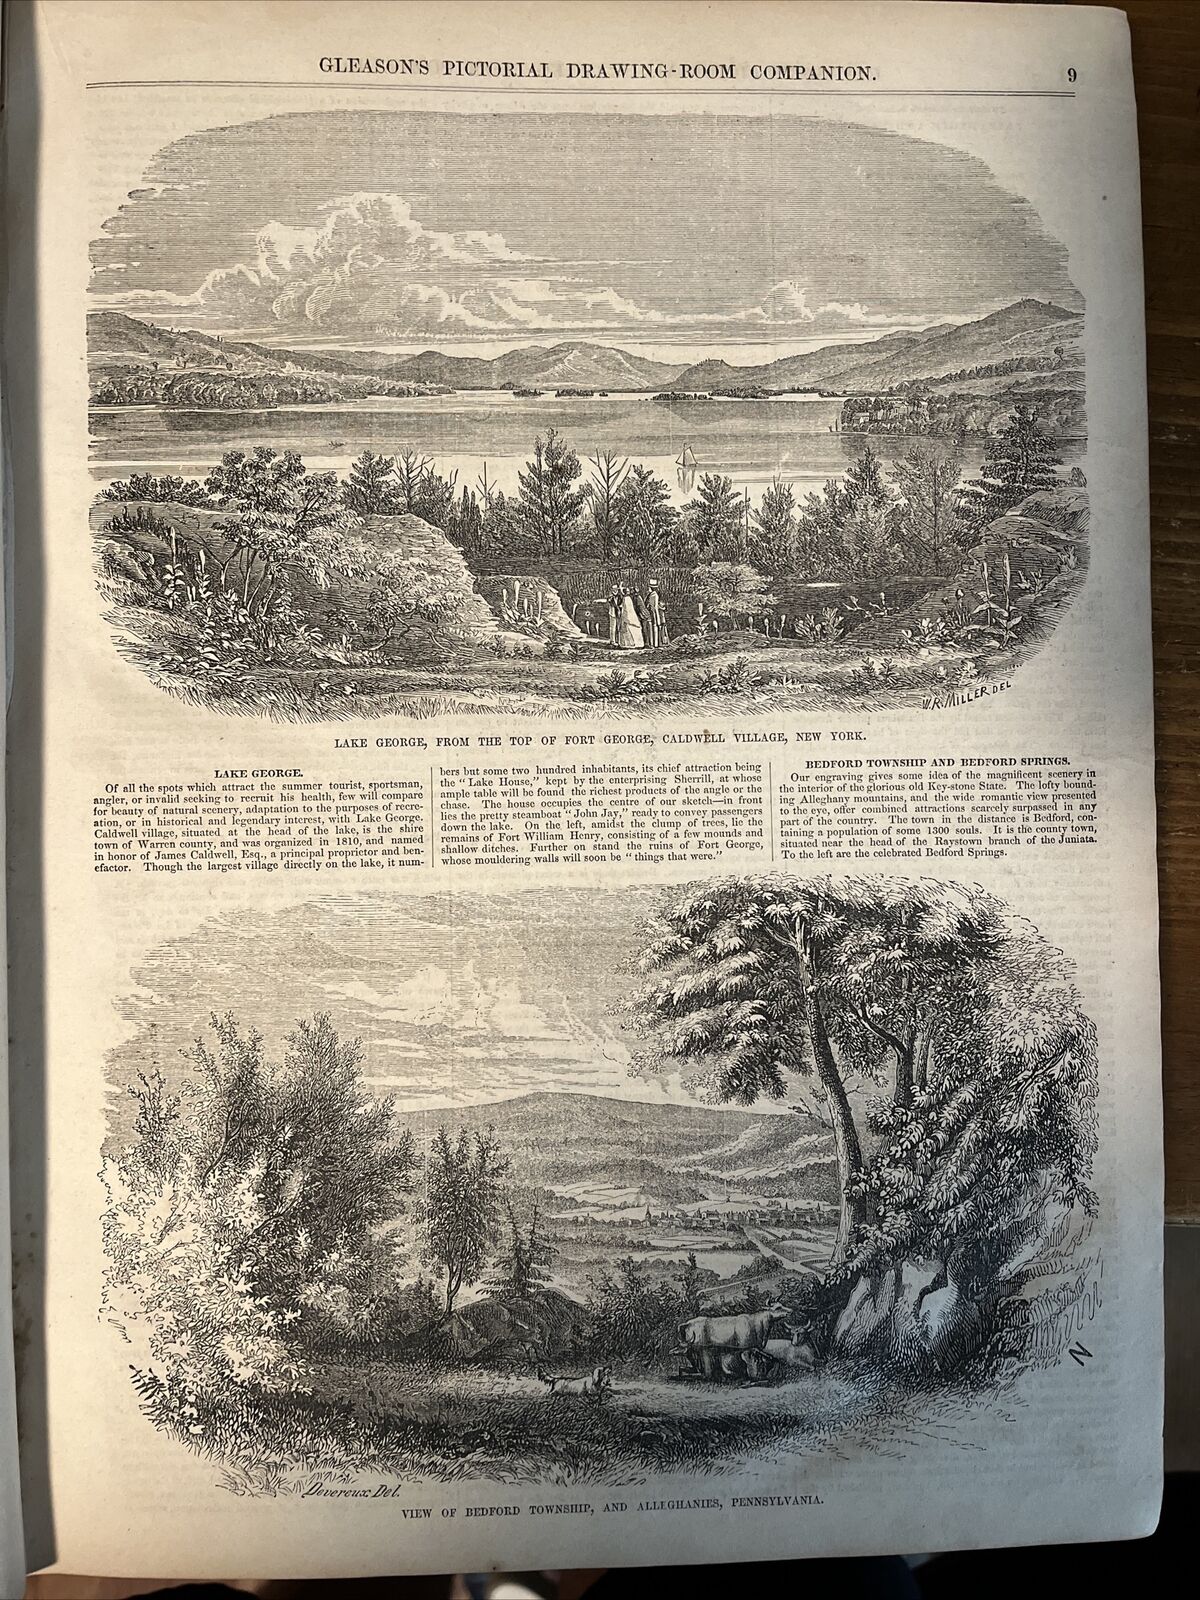 1854 Vol. VII Gleason’s Pictorial; Drawing Room Companion; As Is; Lake George